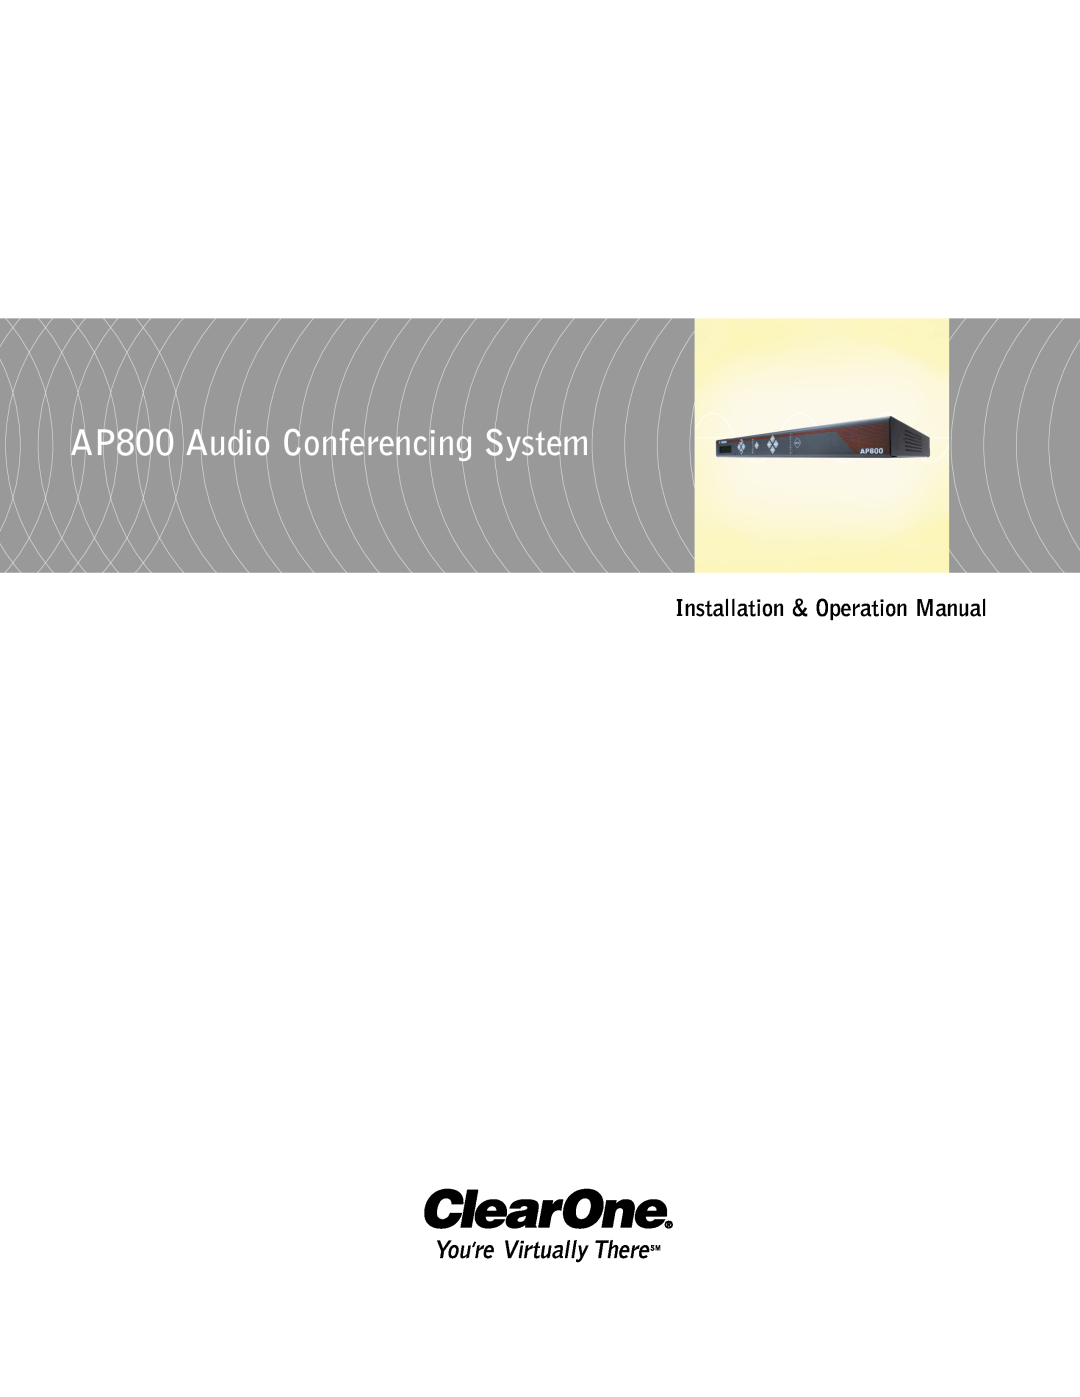 ClearOne comm operation manual AP800 Audio Conferencing System, Installation & Operation Manual 